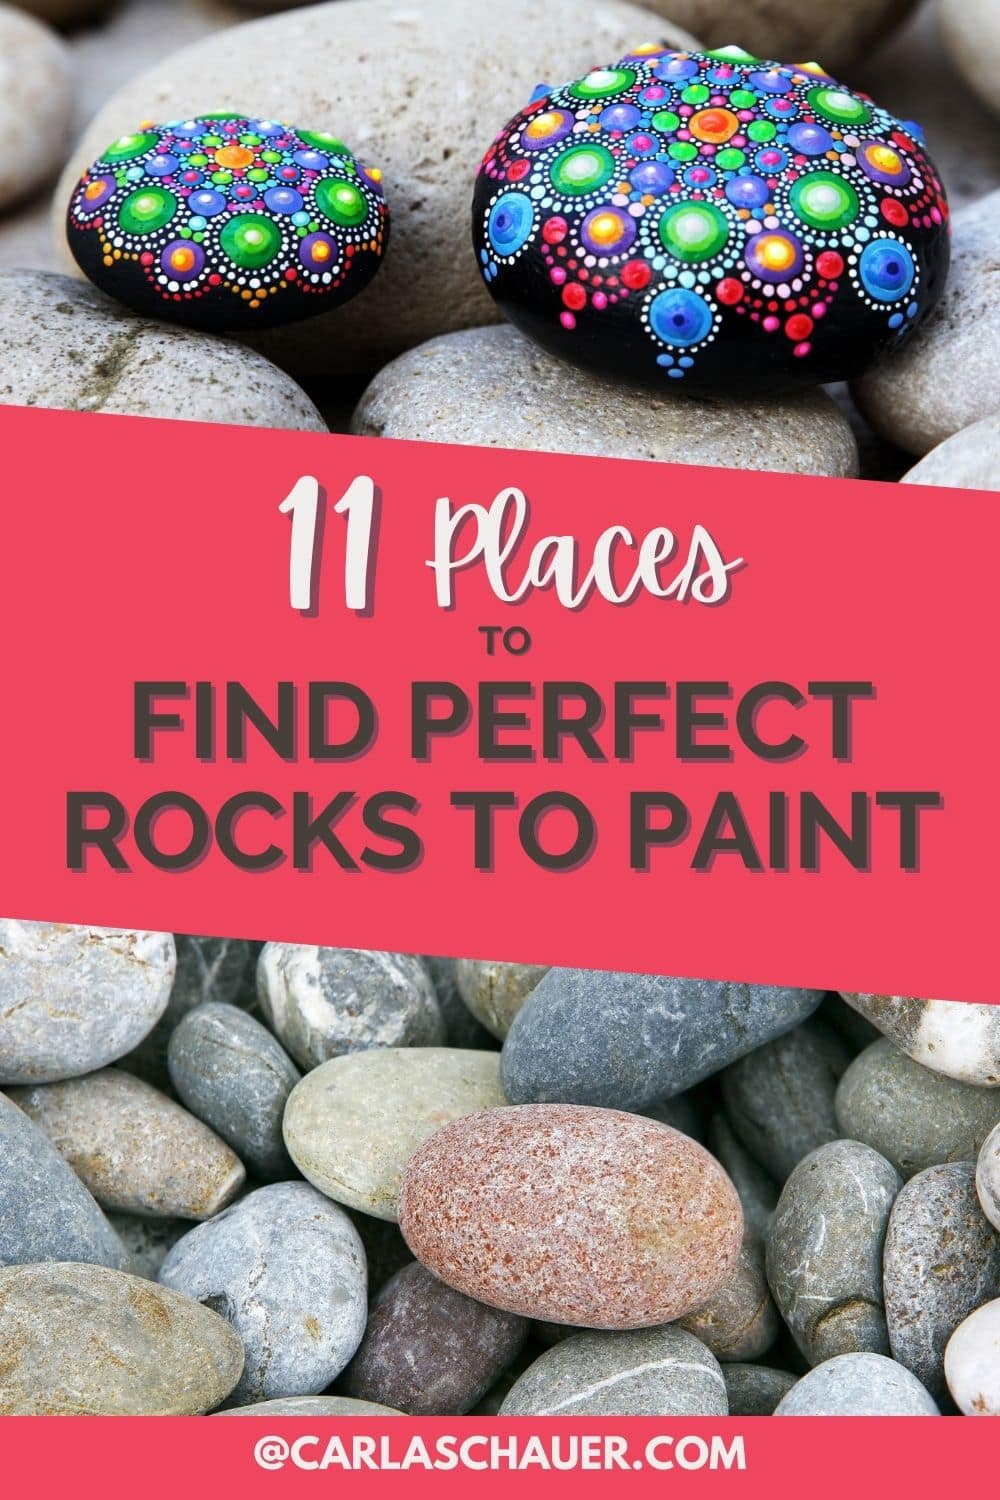 Two images of river rocks, one with painted rocks on top. Text between photos reads "11 Places to find perfect rocks to paint."